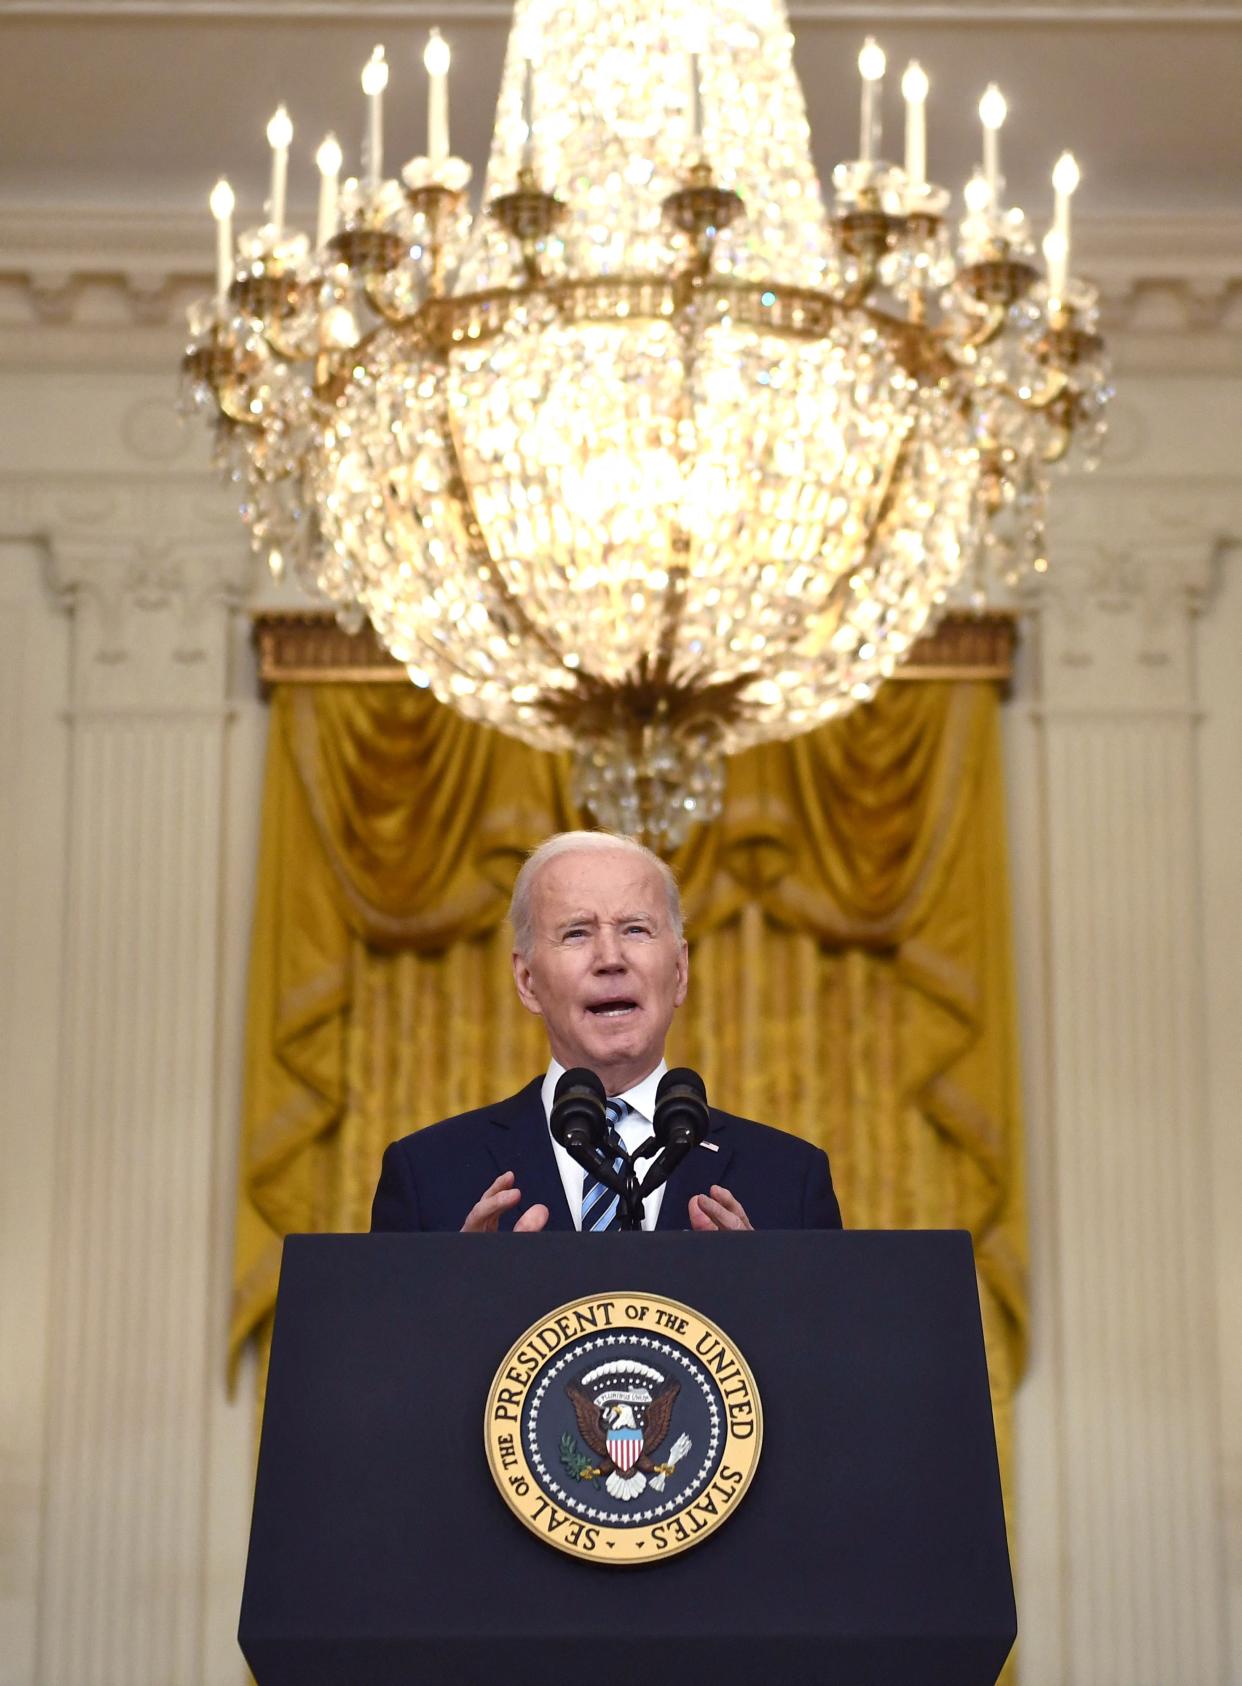 U.S. President Joe Biden addresses the Russian invasion of Ukraine from the East Room of the White House on Feb. 24, 2022, in Washington, DC. Biden on Thursday announced severe new sanctions on Russia in response to the invasion of Ukraine, including freezing assets of major banks and cutting off high-tech exports to the country. "This is going to impose severe cost on the Russian economy, both immediately and over time," Biden said.